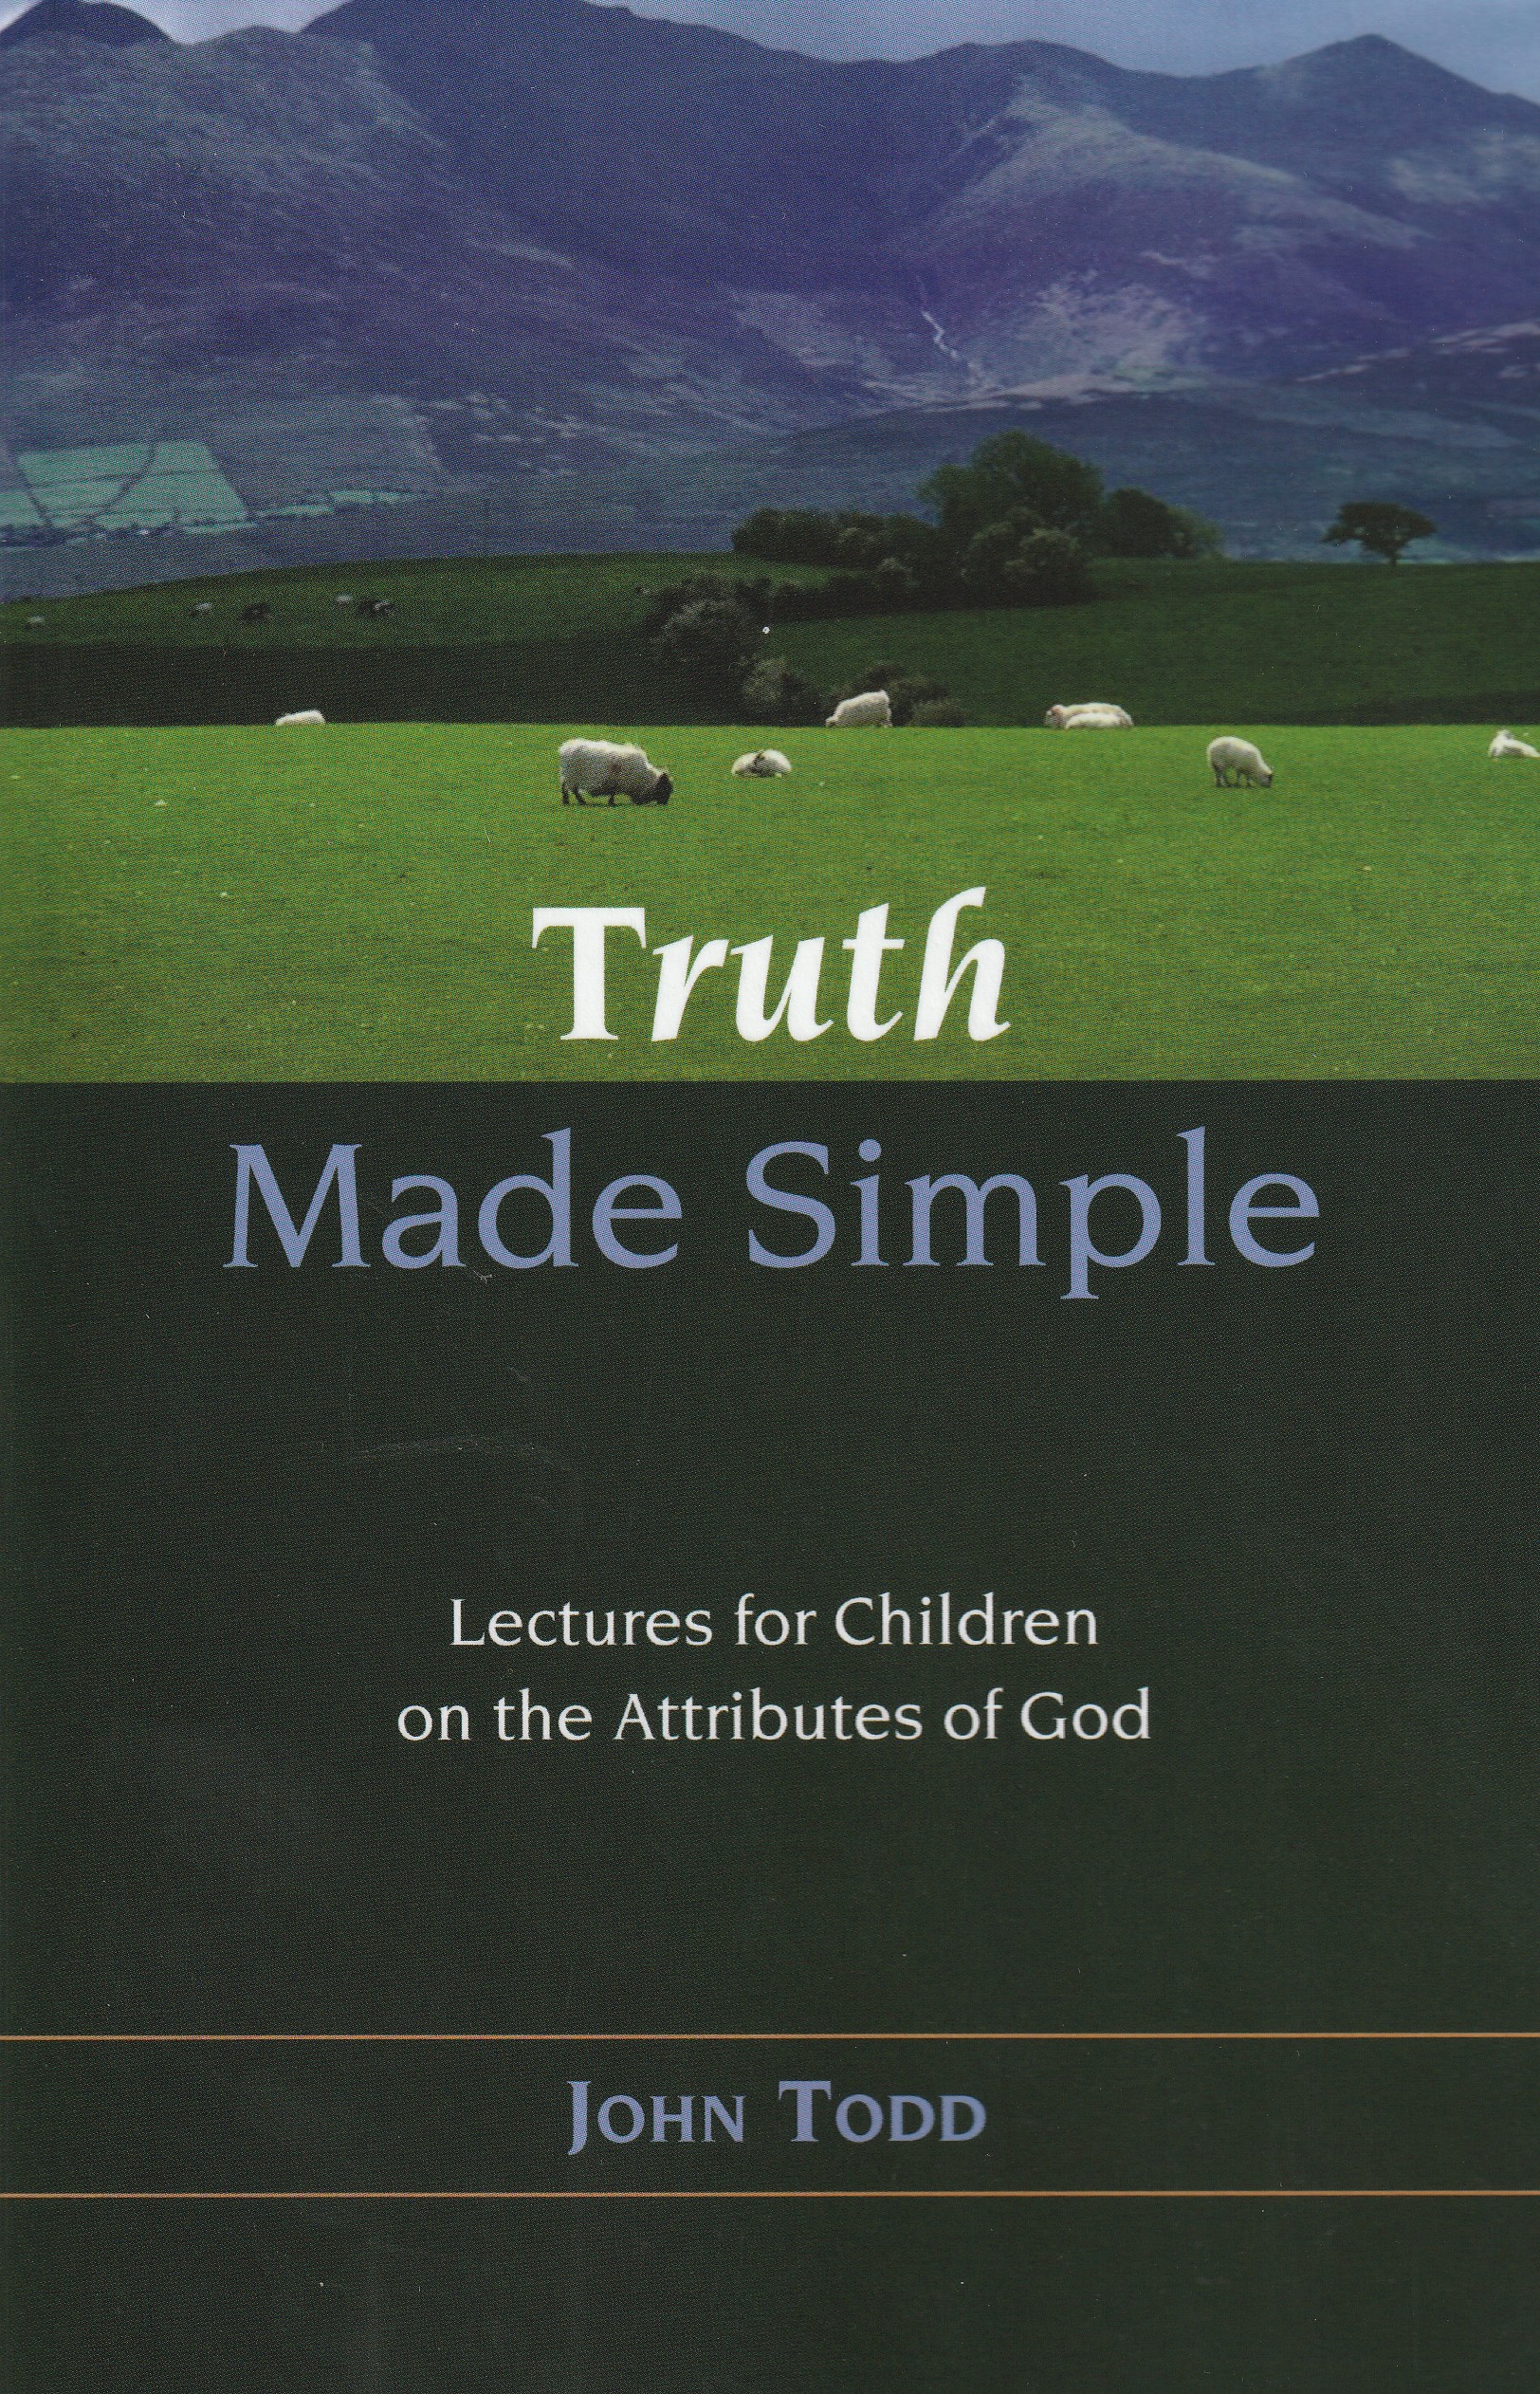 Truth Made Simple: Lectures for Children on the Attributes of God